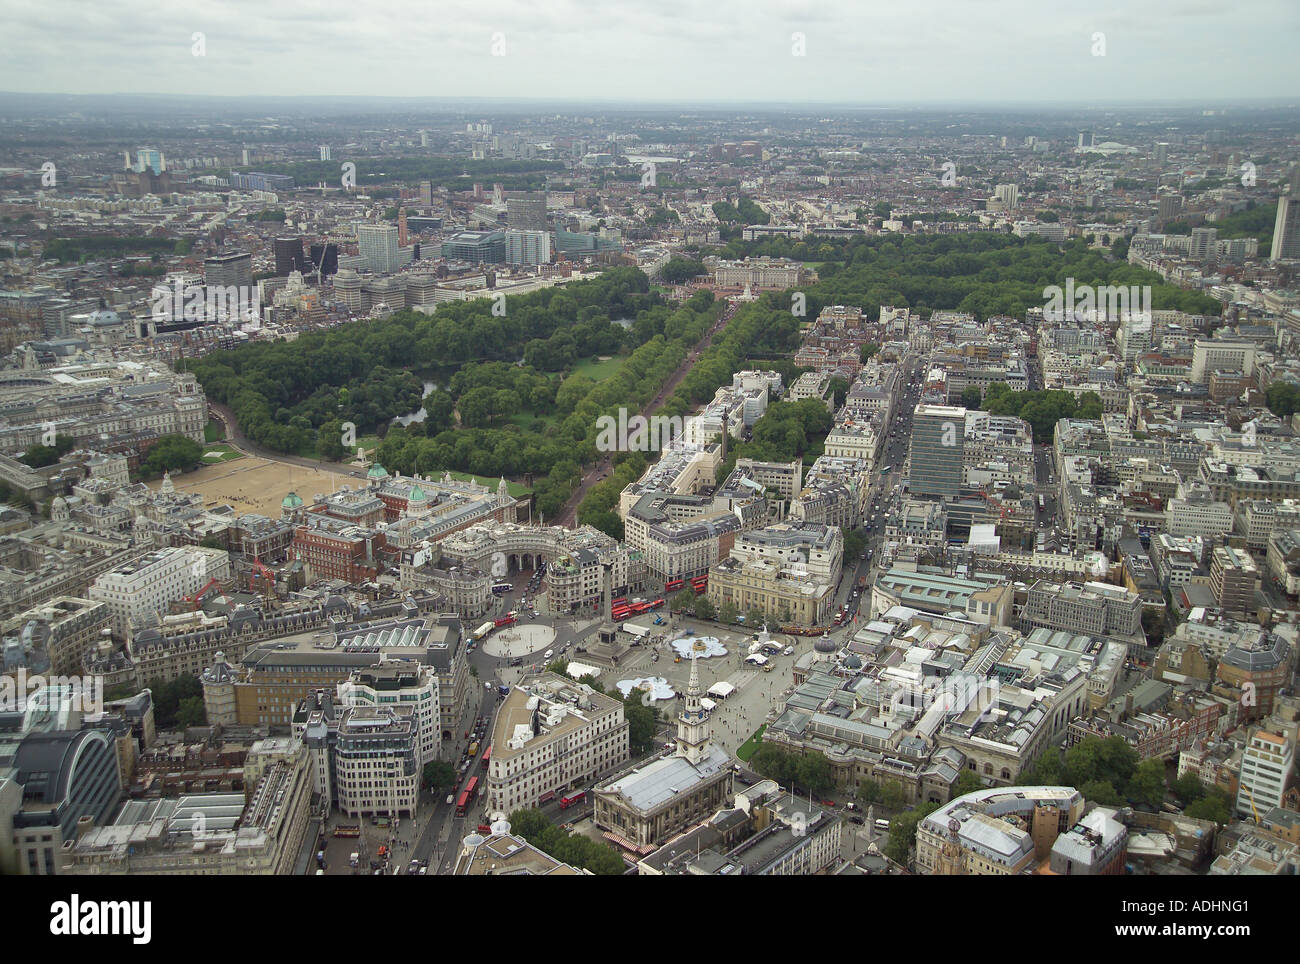 Aerial view of Trafalgar Square, Admiralty Arch, St James's Park, Buckingham Palace, Green Park & Horse Guards Parade in London Stock Photo